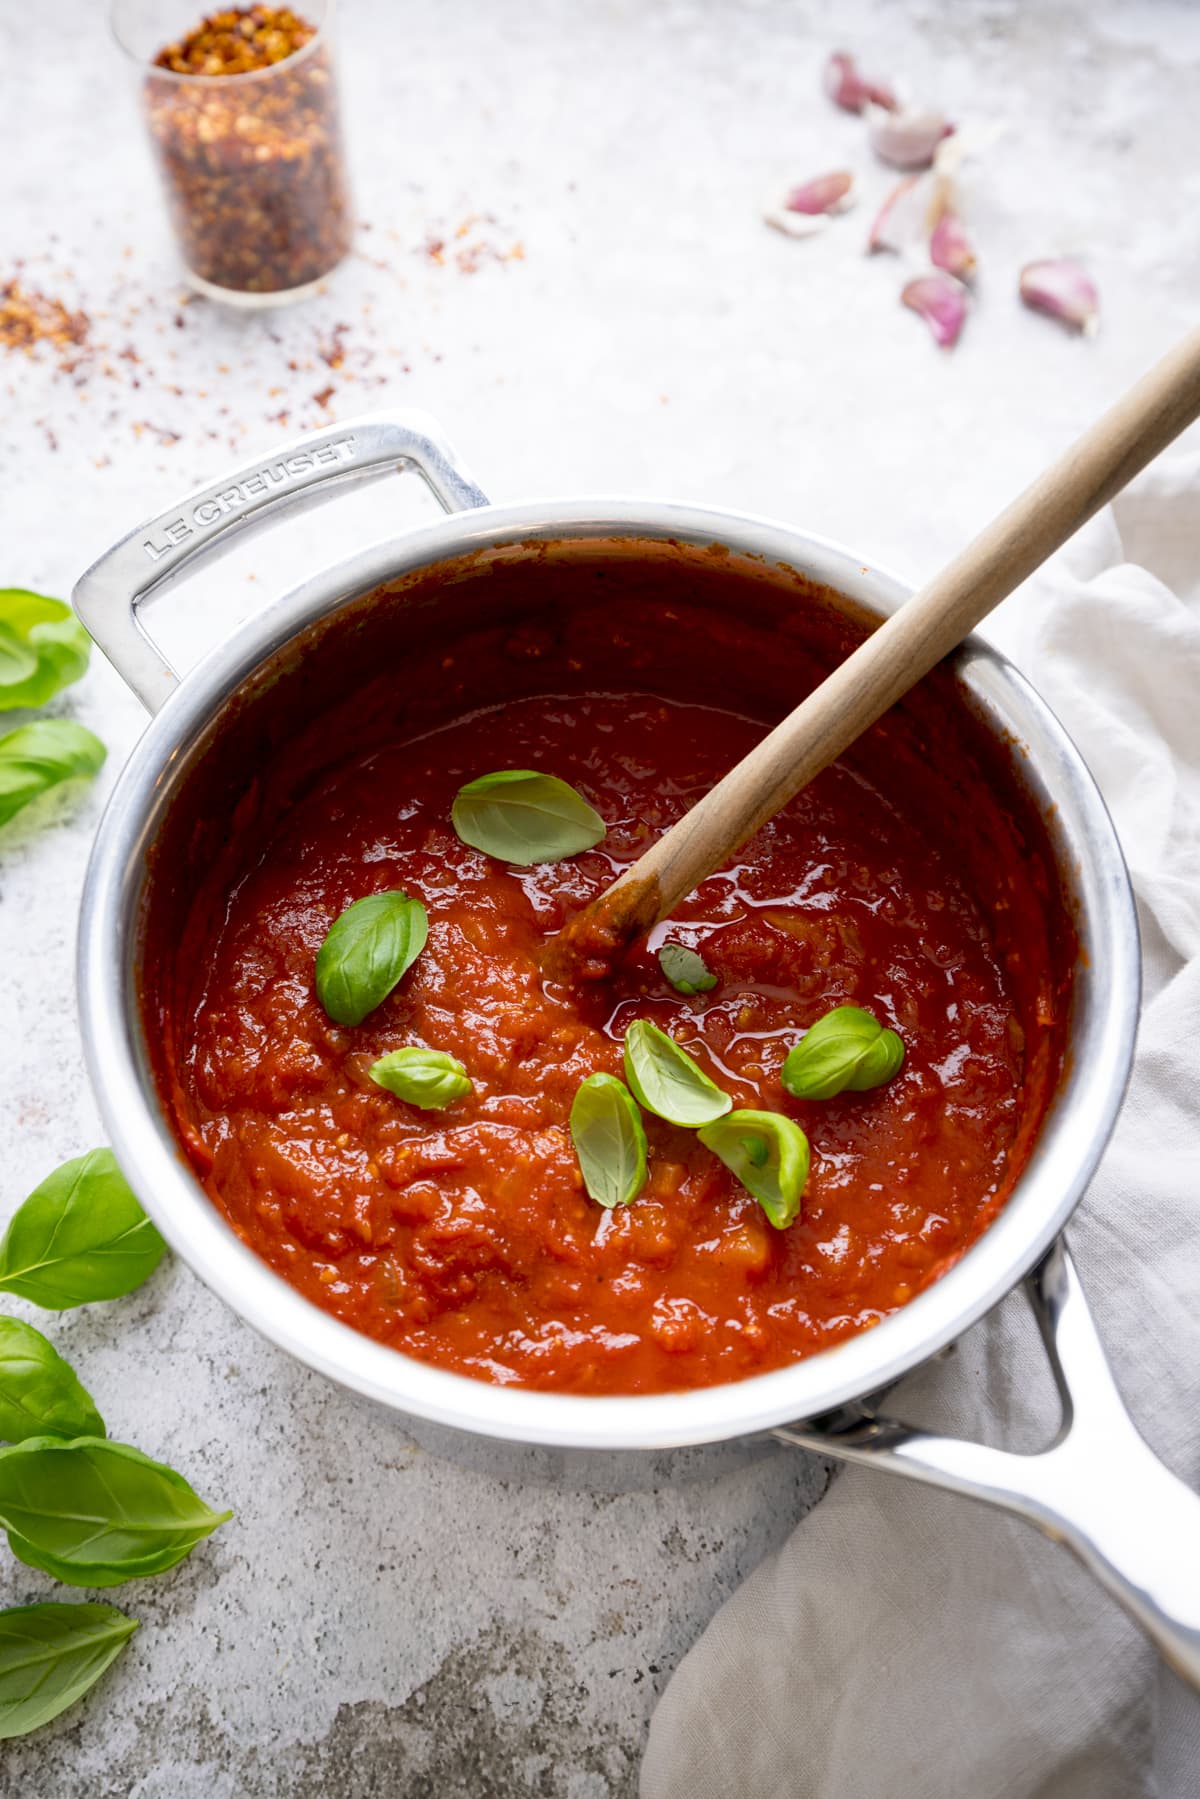 Overhead image of a silver pan filled with arrabbiata sauce on a light background. There is a wooden spoon and sprinkled fresh basil leaves in the sauce. There are basil leaves, garlic cloves and a jar of chilli flakes around the pan.